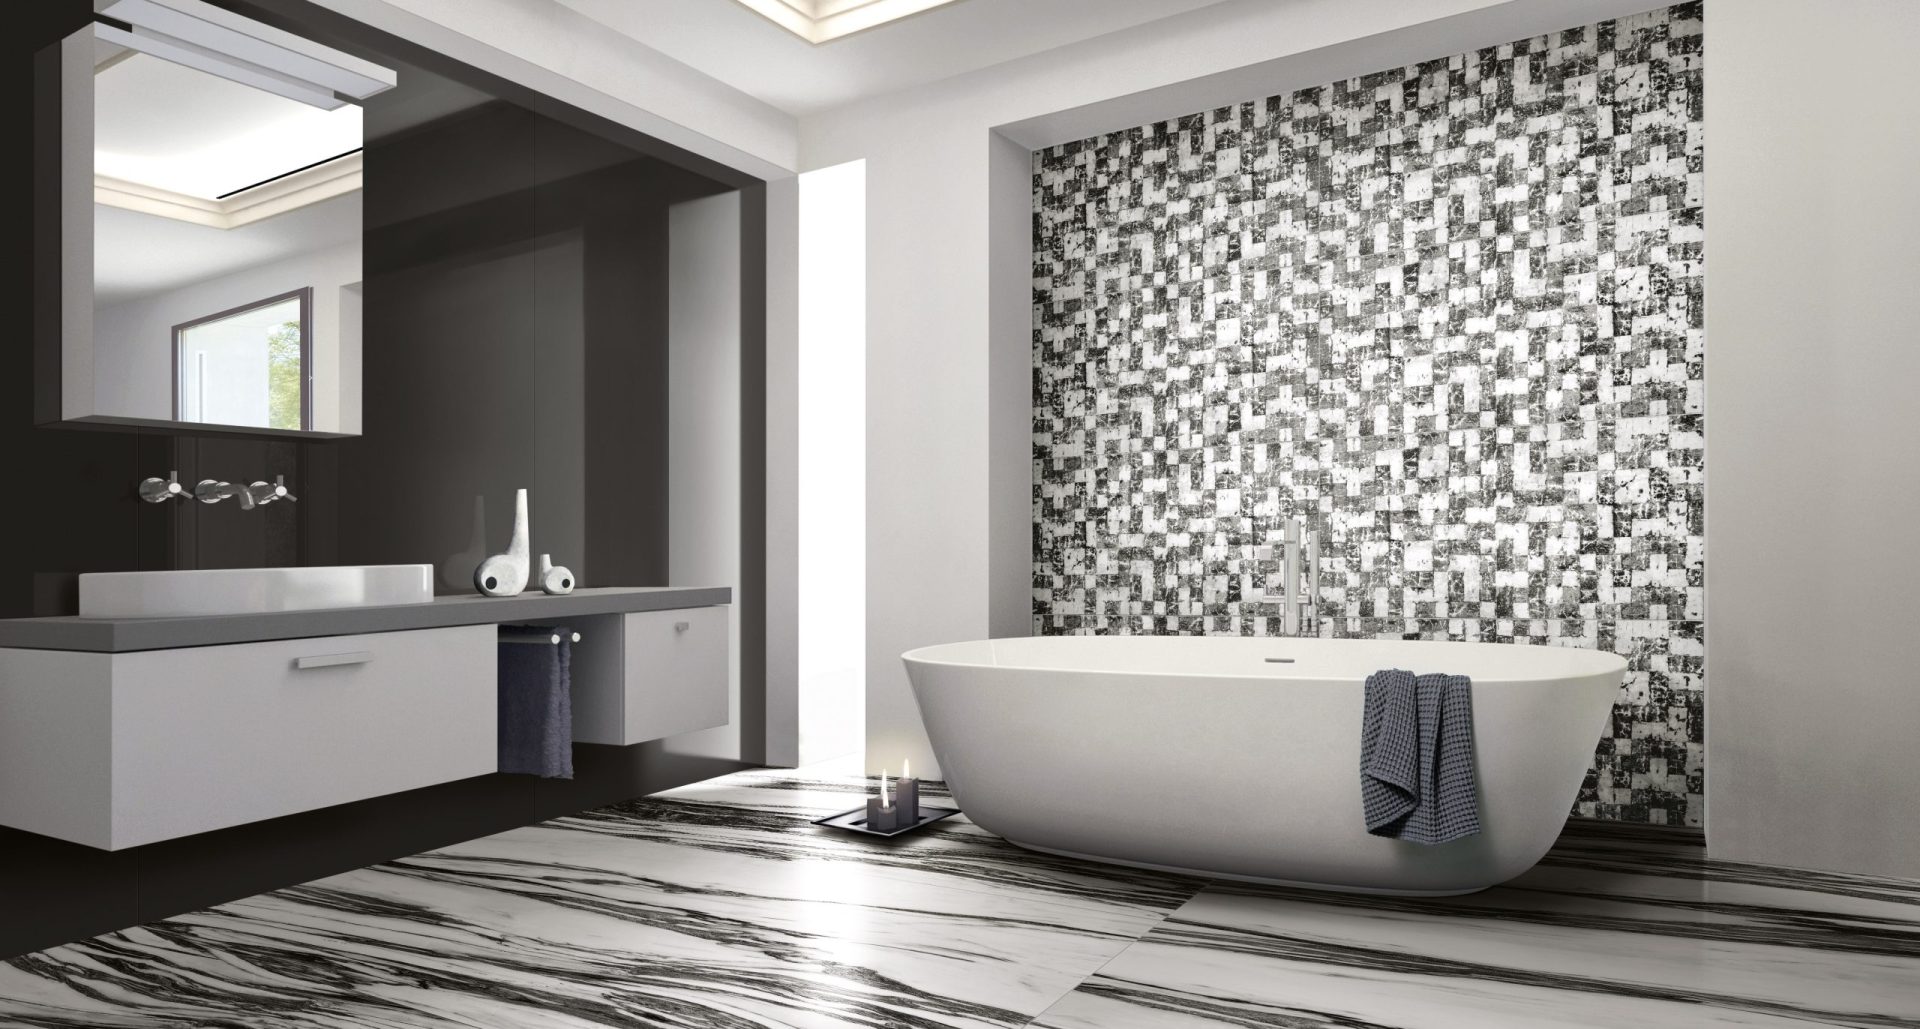 B&W wave porcelain tile on the floor in a modern bathroom and mosaic on a feature wall.